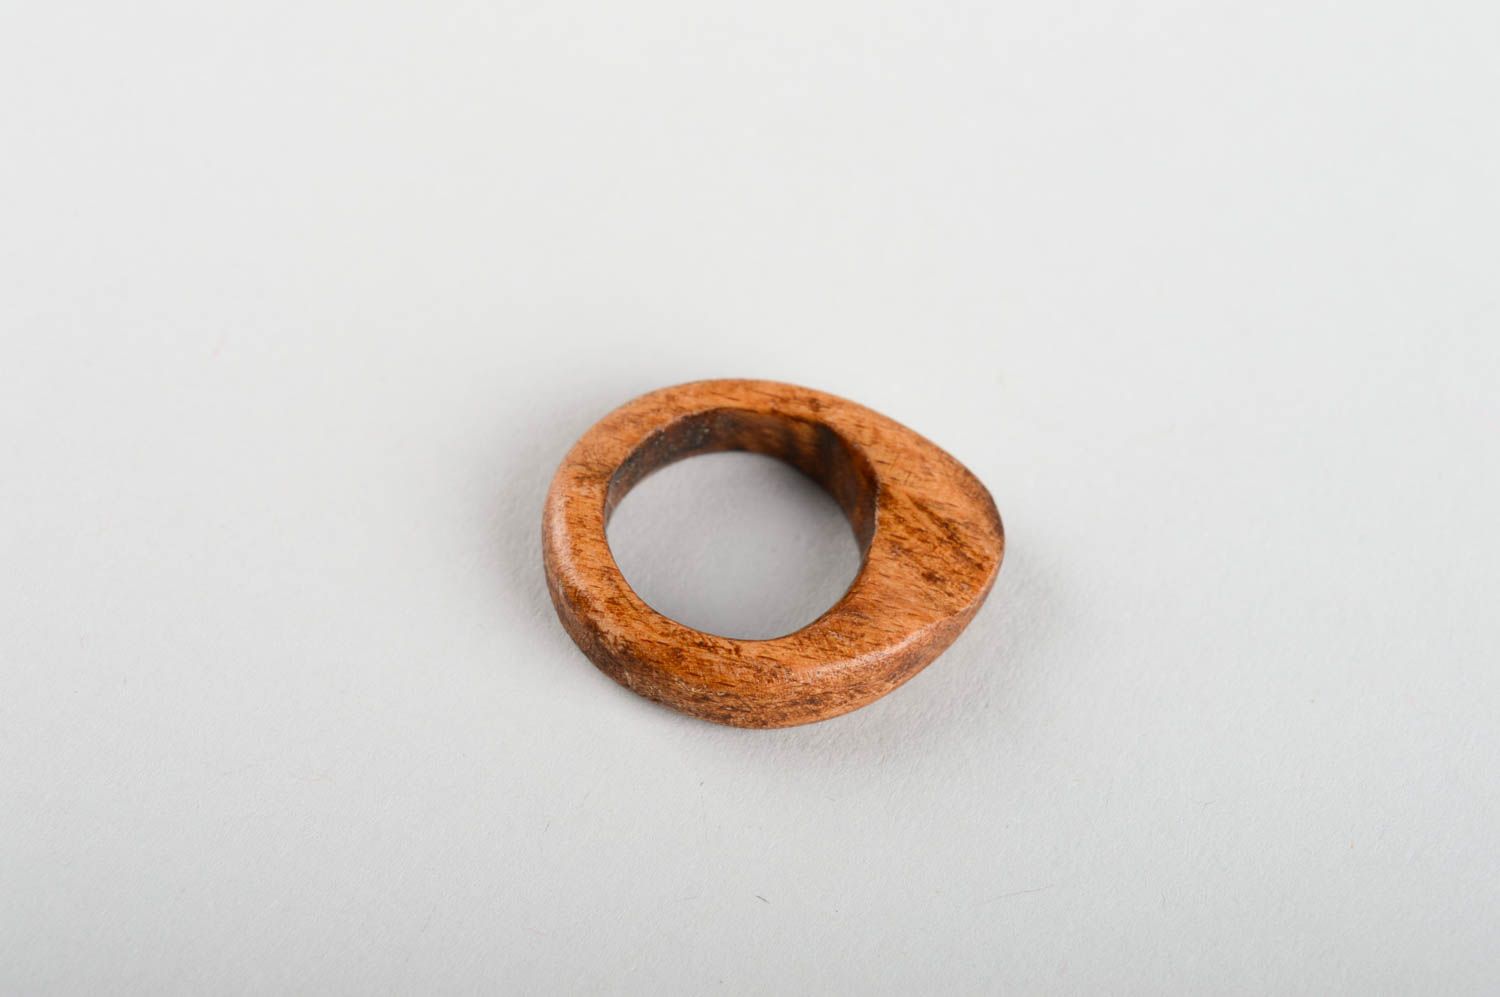 Unusual handmade wooden ring wood craft costume jewelry designs gifts for her photo 5